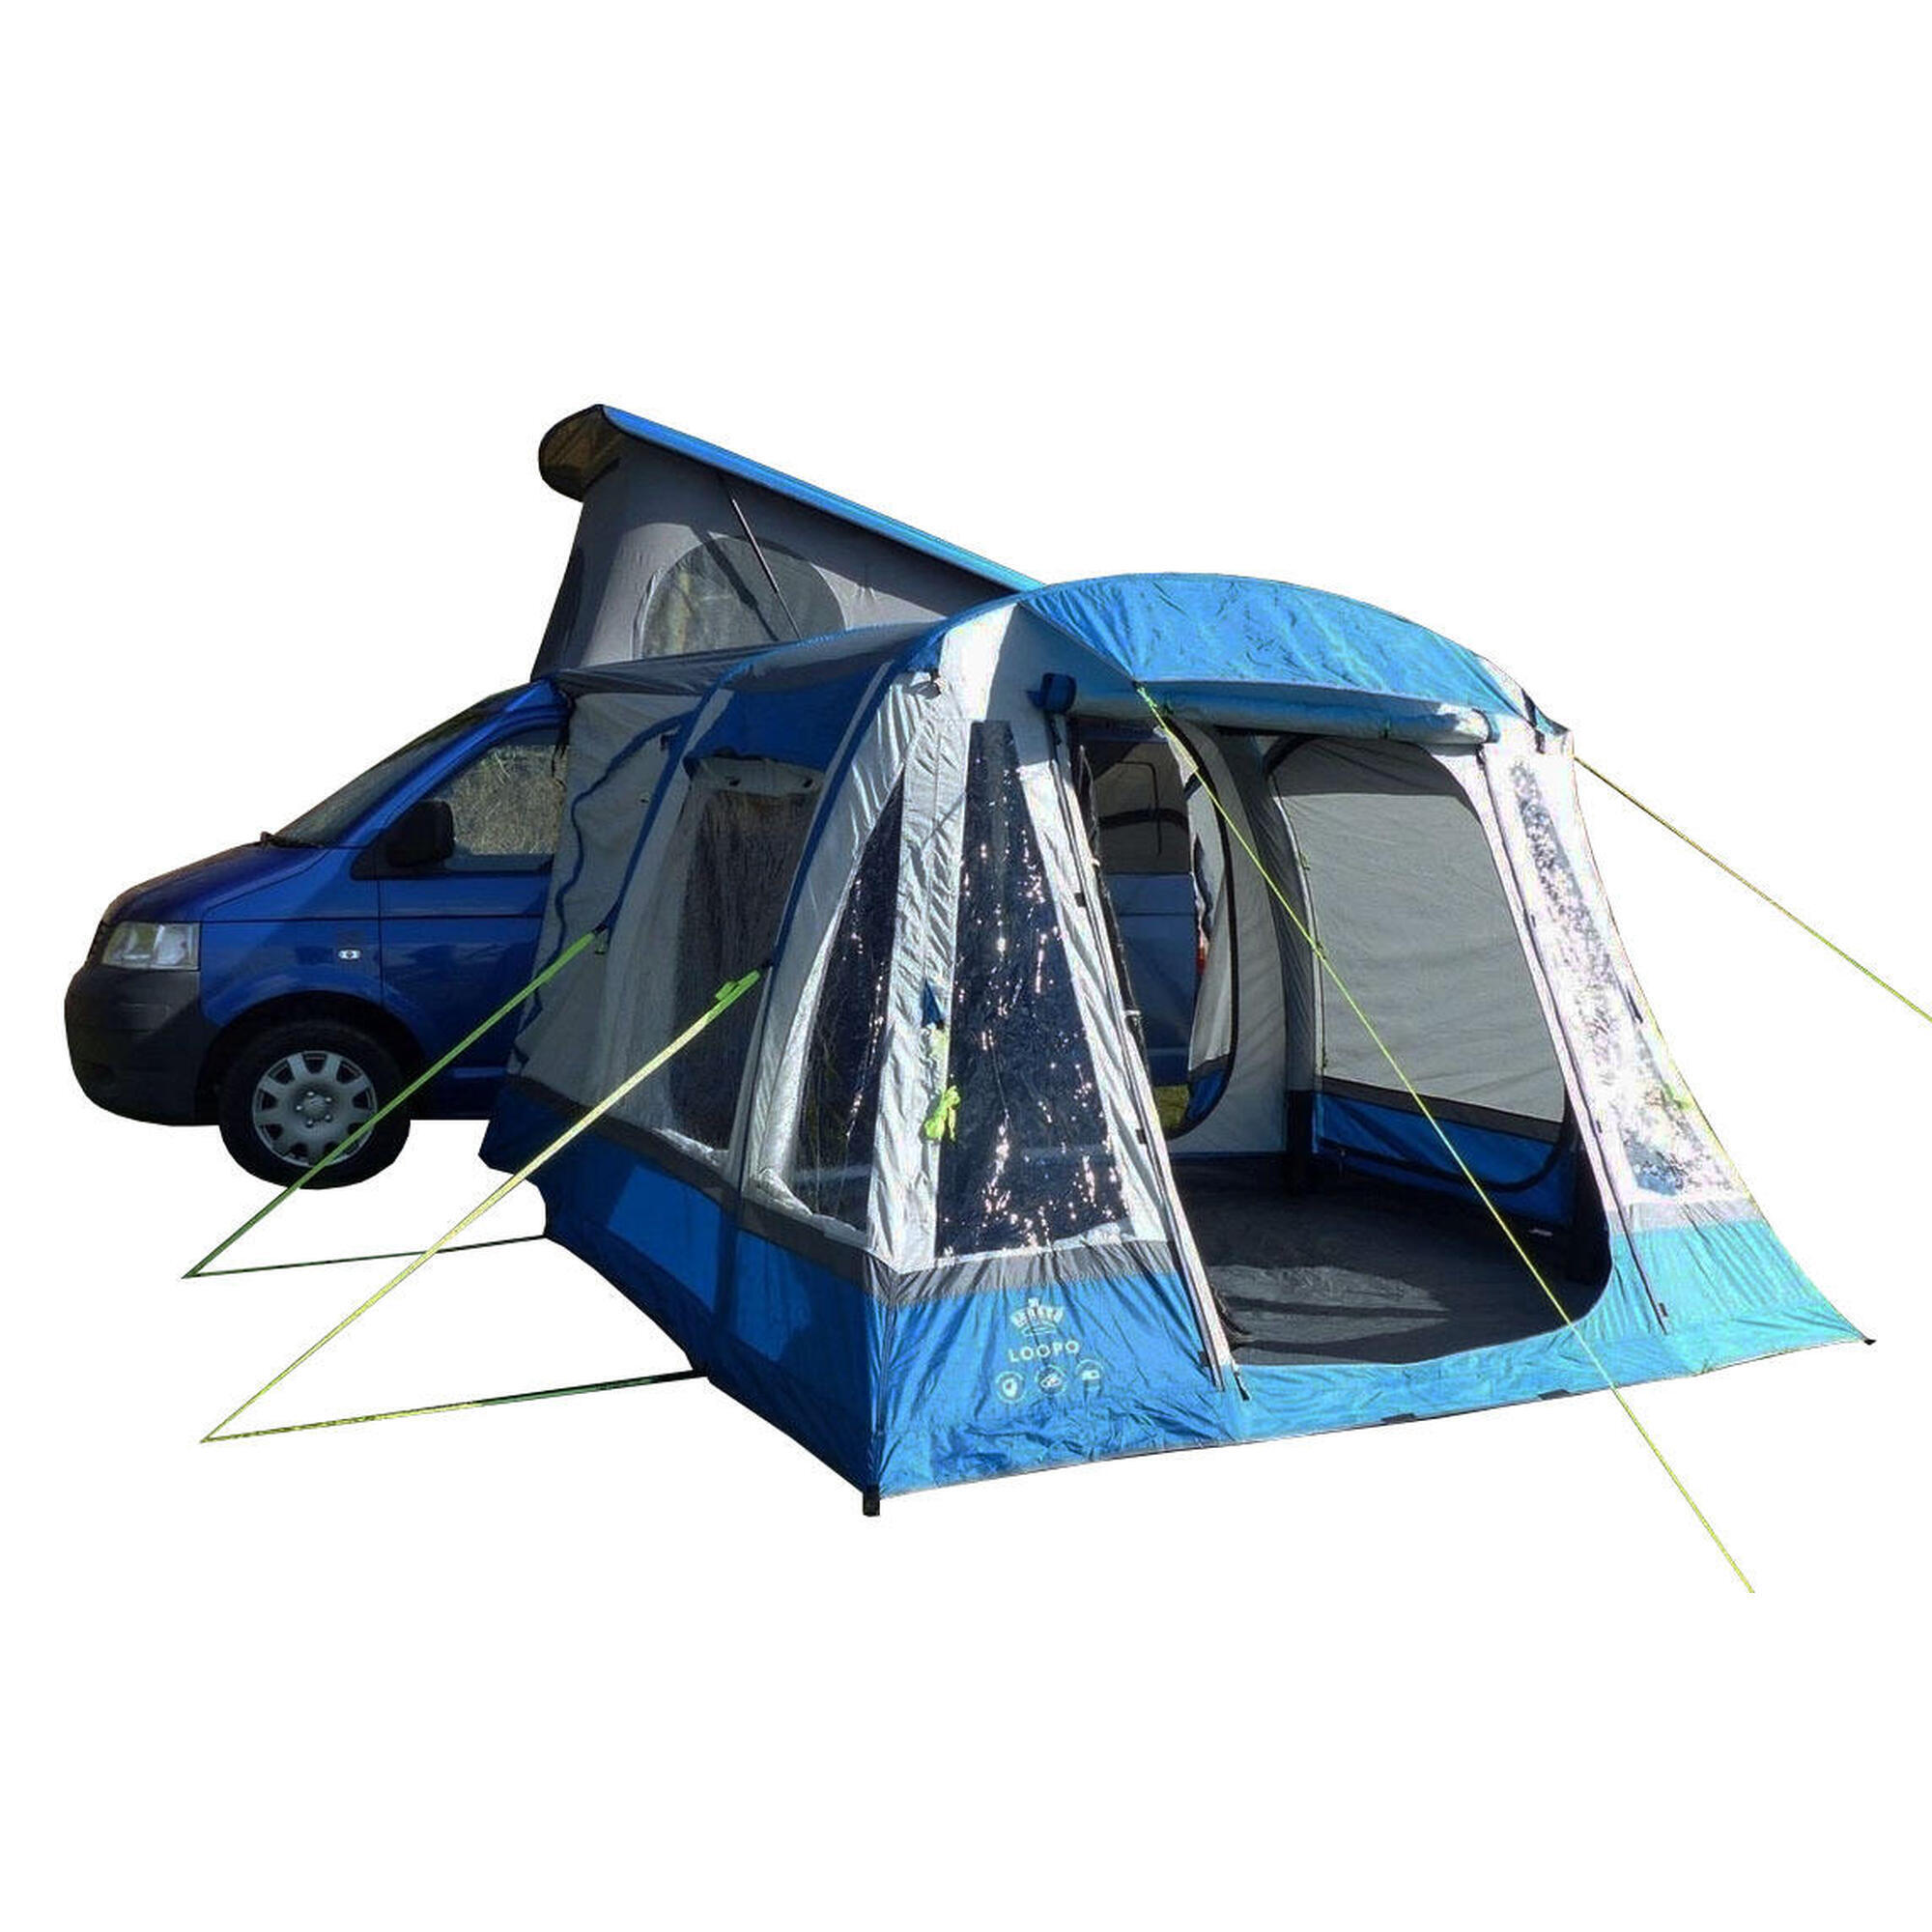 OLPRO OLPRO Loopo Breeze - Inflatable Campervan Awning